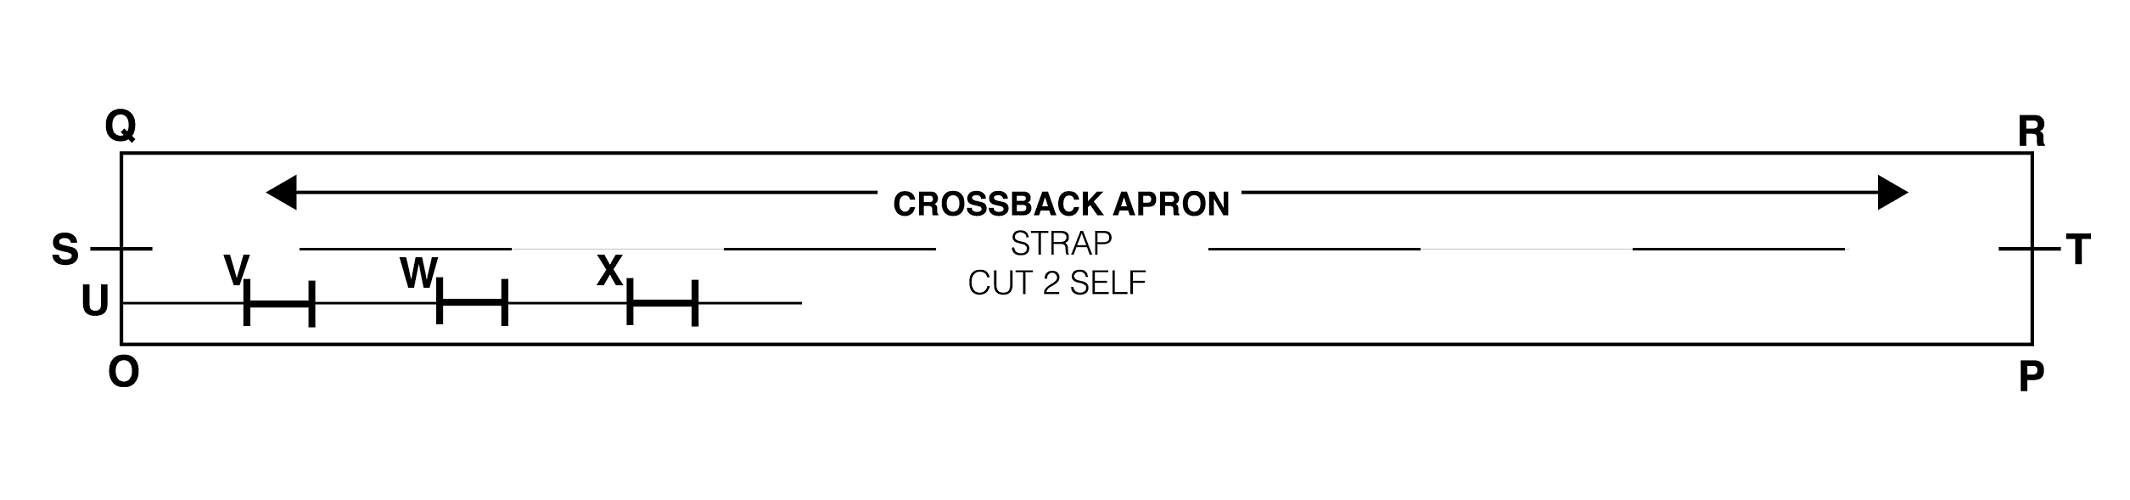 Crossback Apron Drafting Instructions